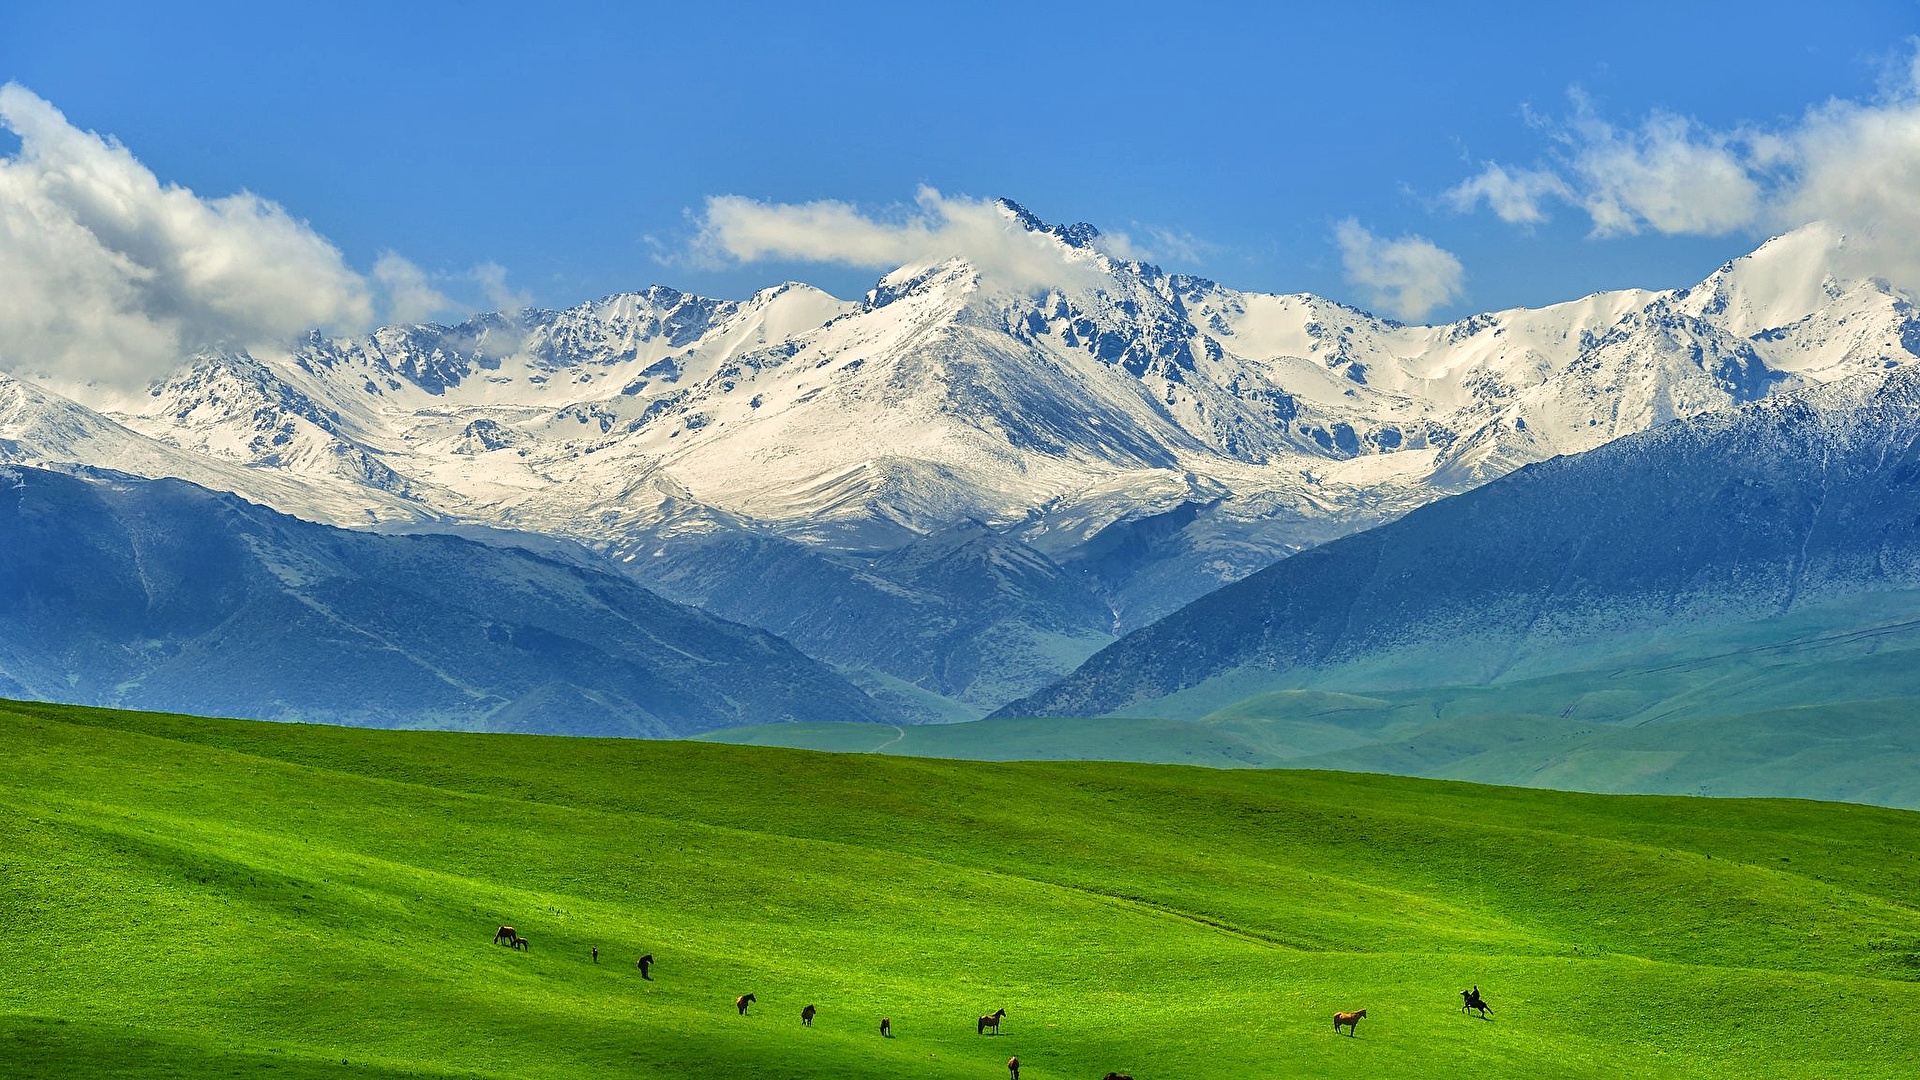 General 1920x1080 mountains horse snowy peak Kazakhstan clouds morning spring Spring Mountains summer blue green horse riding photography nature grass snow